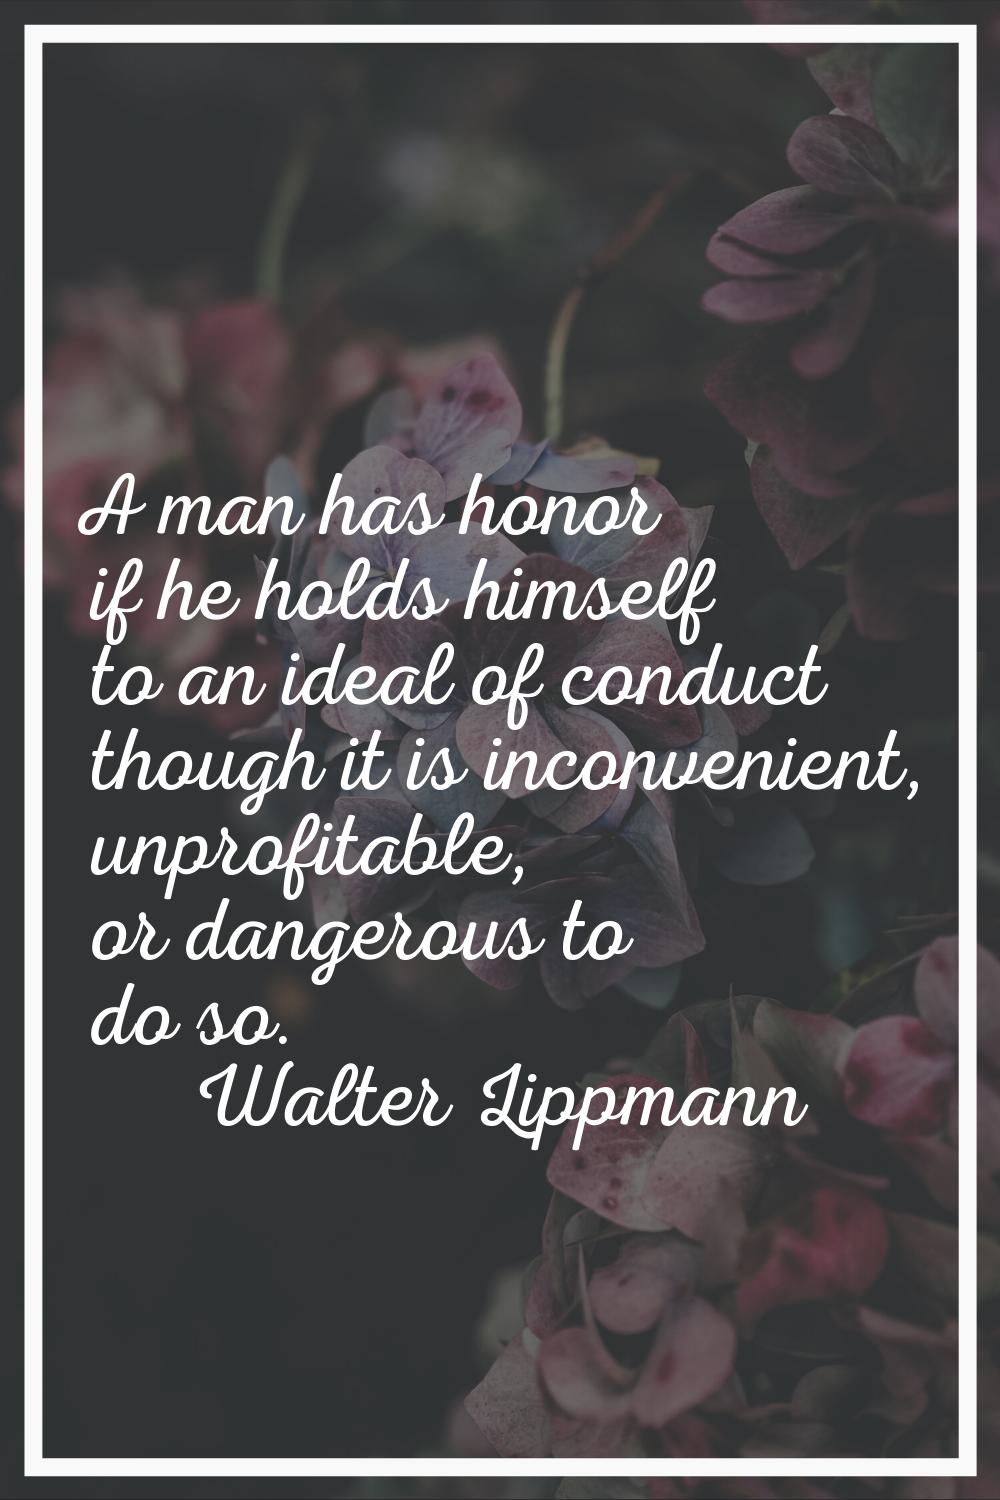 A man has honor if he holds himself to an ideal of conduct though it is inconvenient, unprofitable,